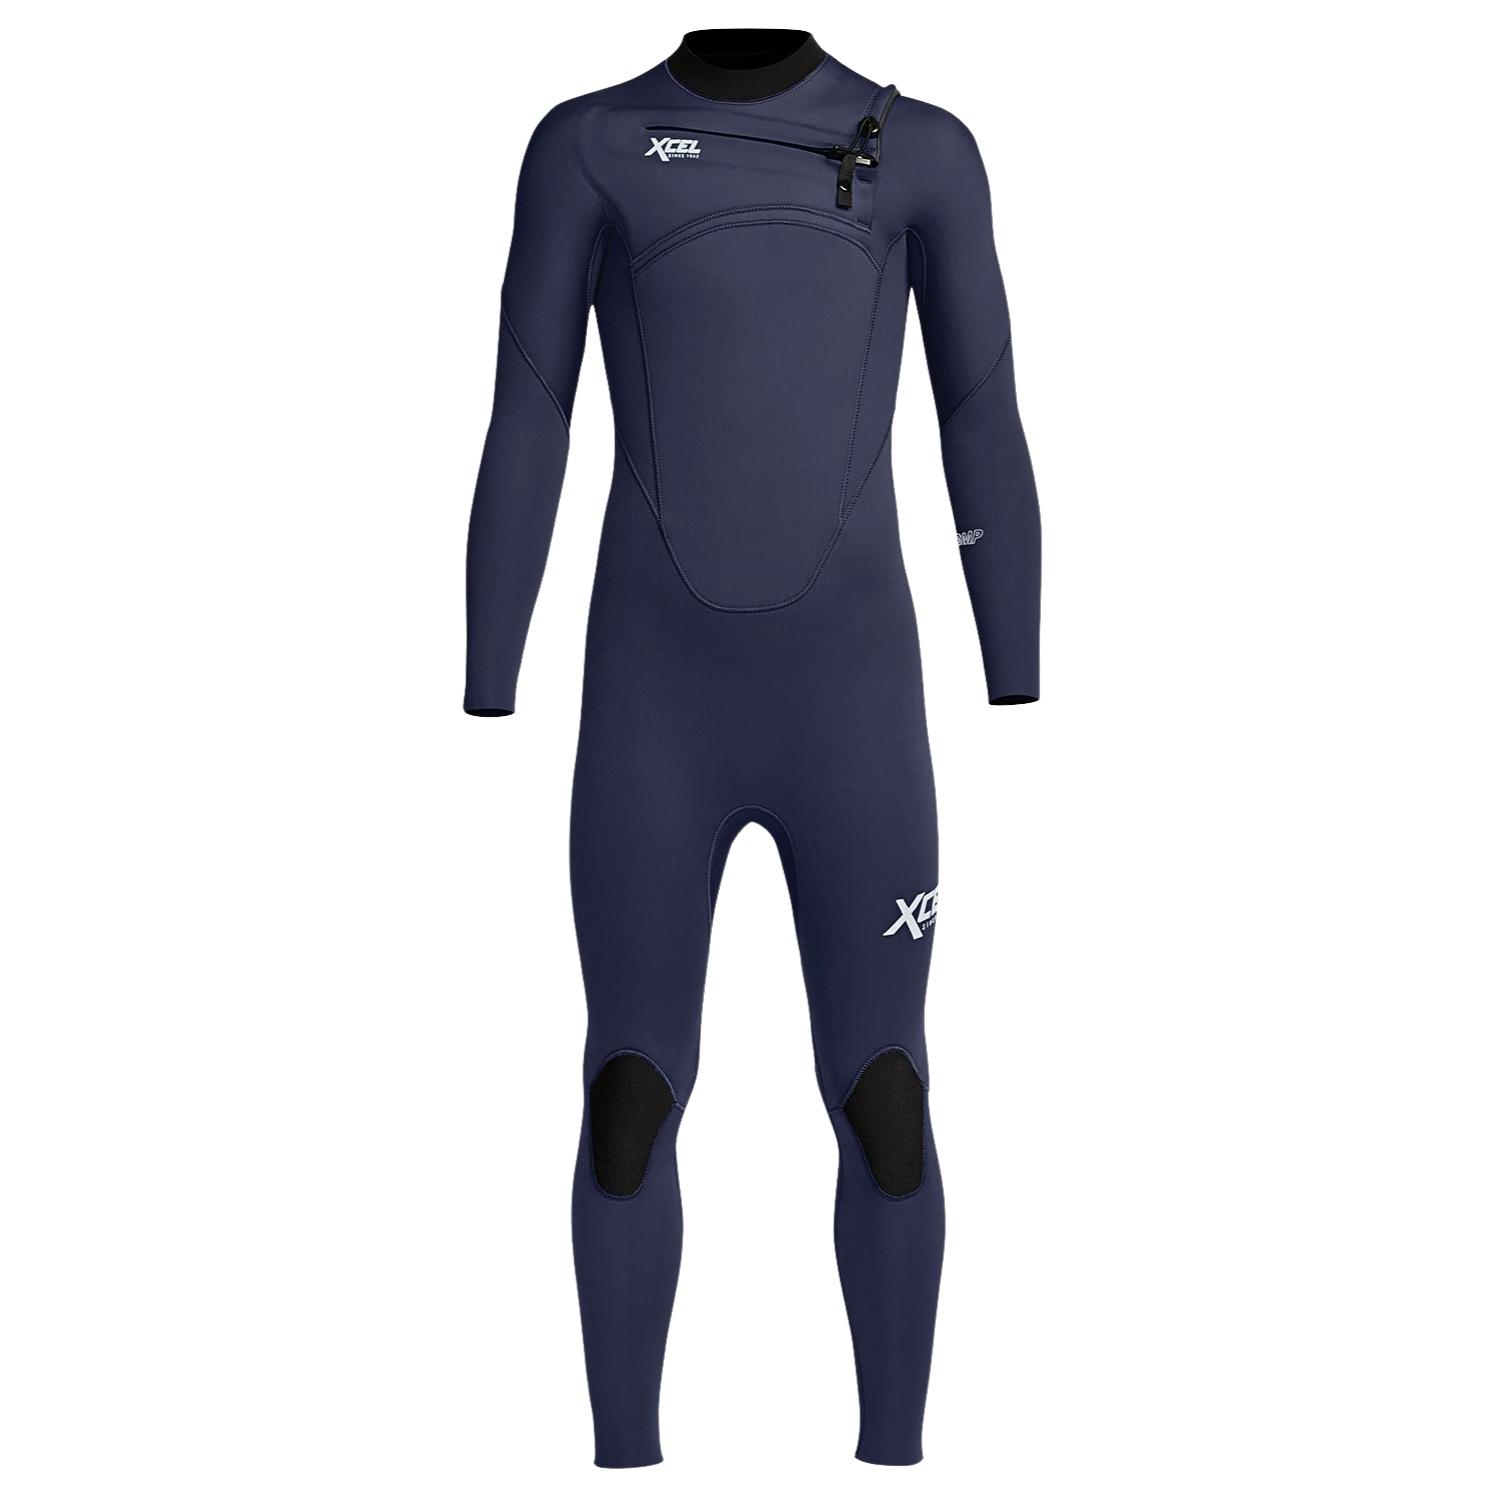 Xcel Youth Comp 3/2mm Kids Chest Zip Wetsuit - Midnight Blue - Kids Full Length Wetsuit by Xcel